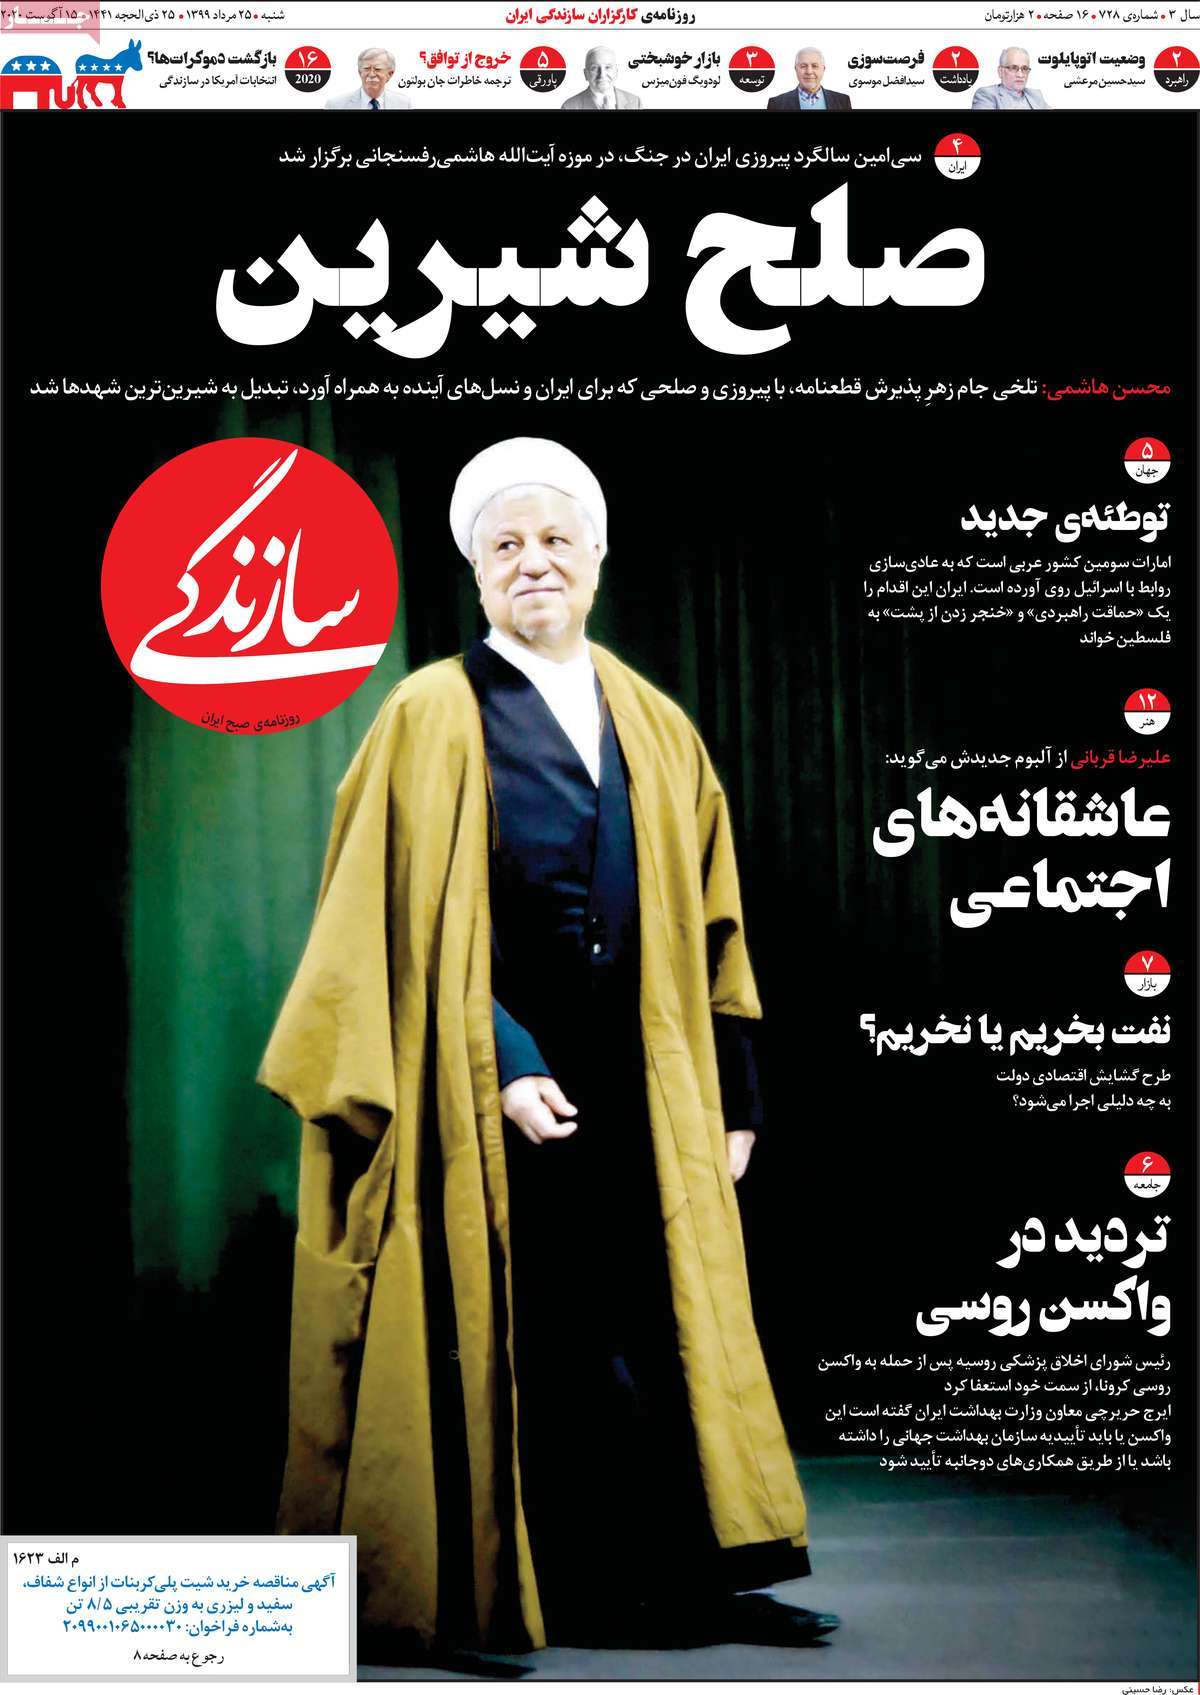 A Look at Iranian Newspaper Front Pages on August 15